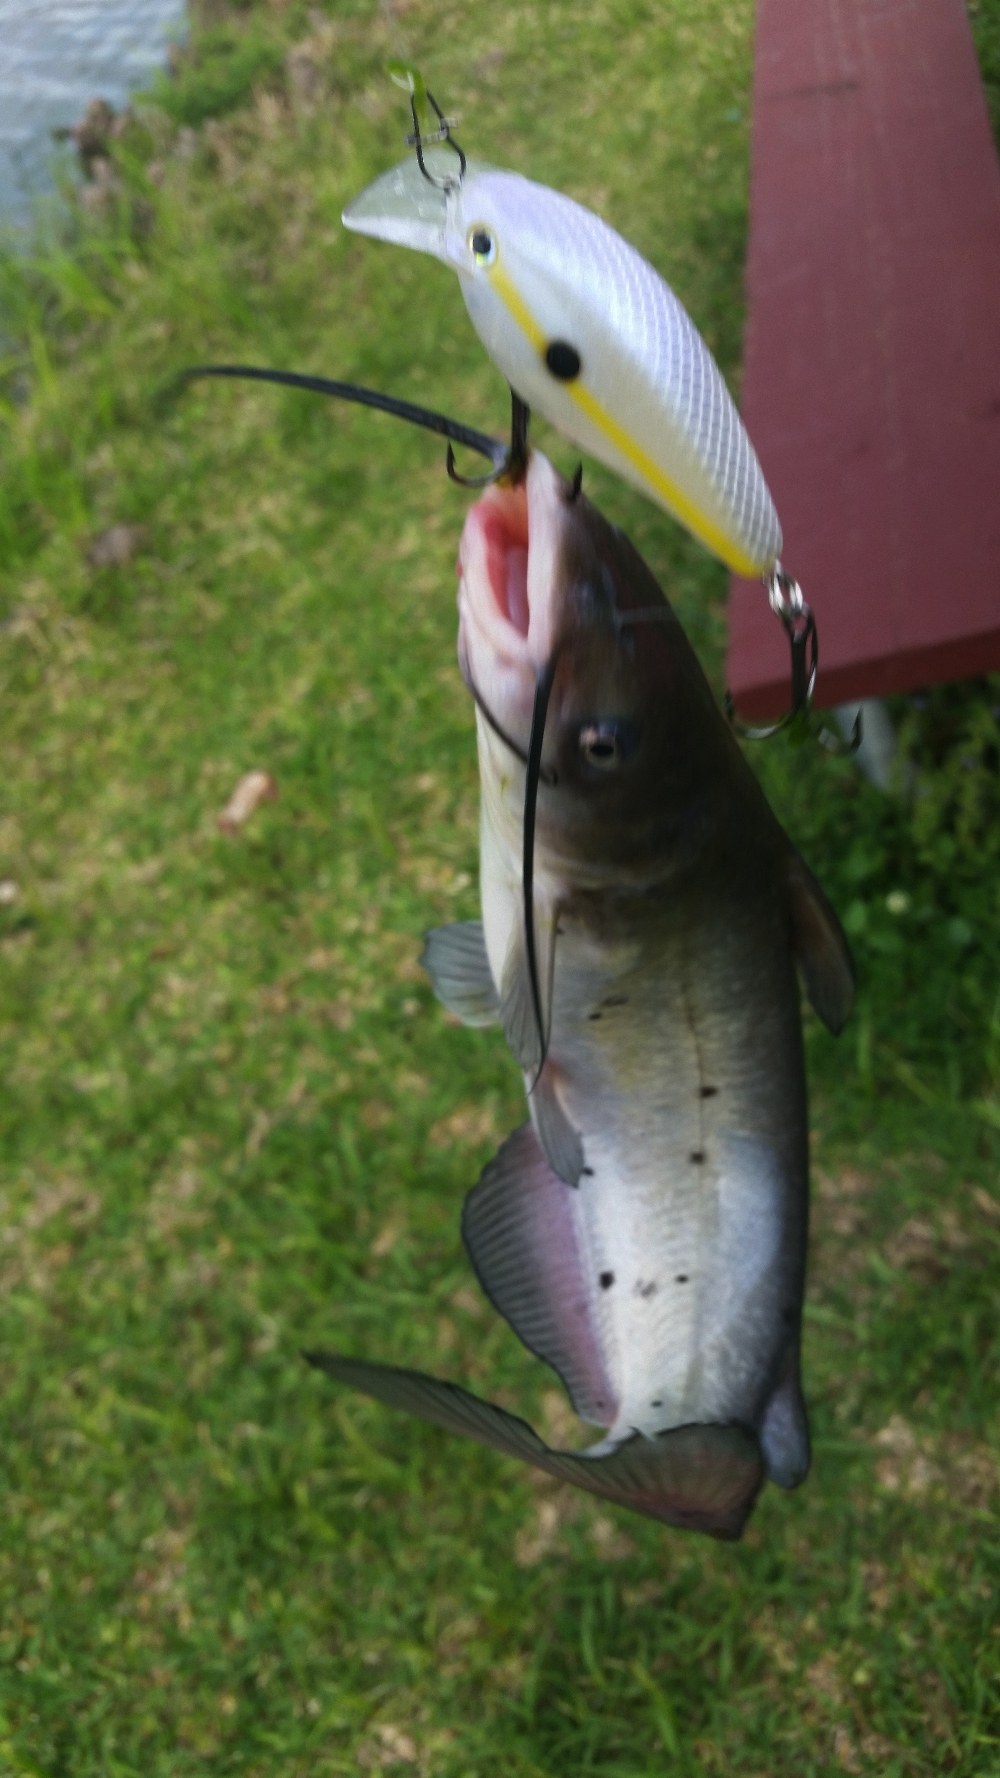 My first official crankbait catch! - Not what I expected! - Other